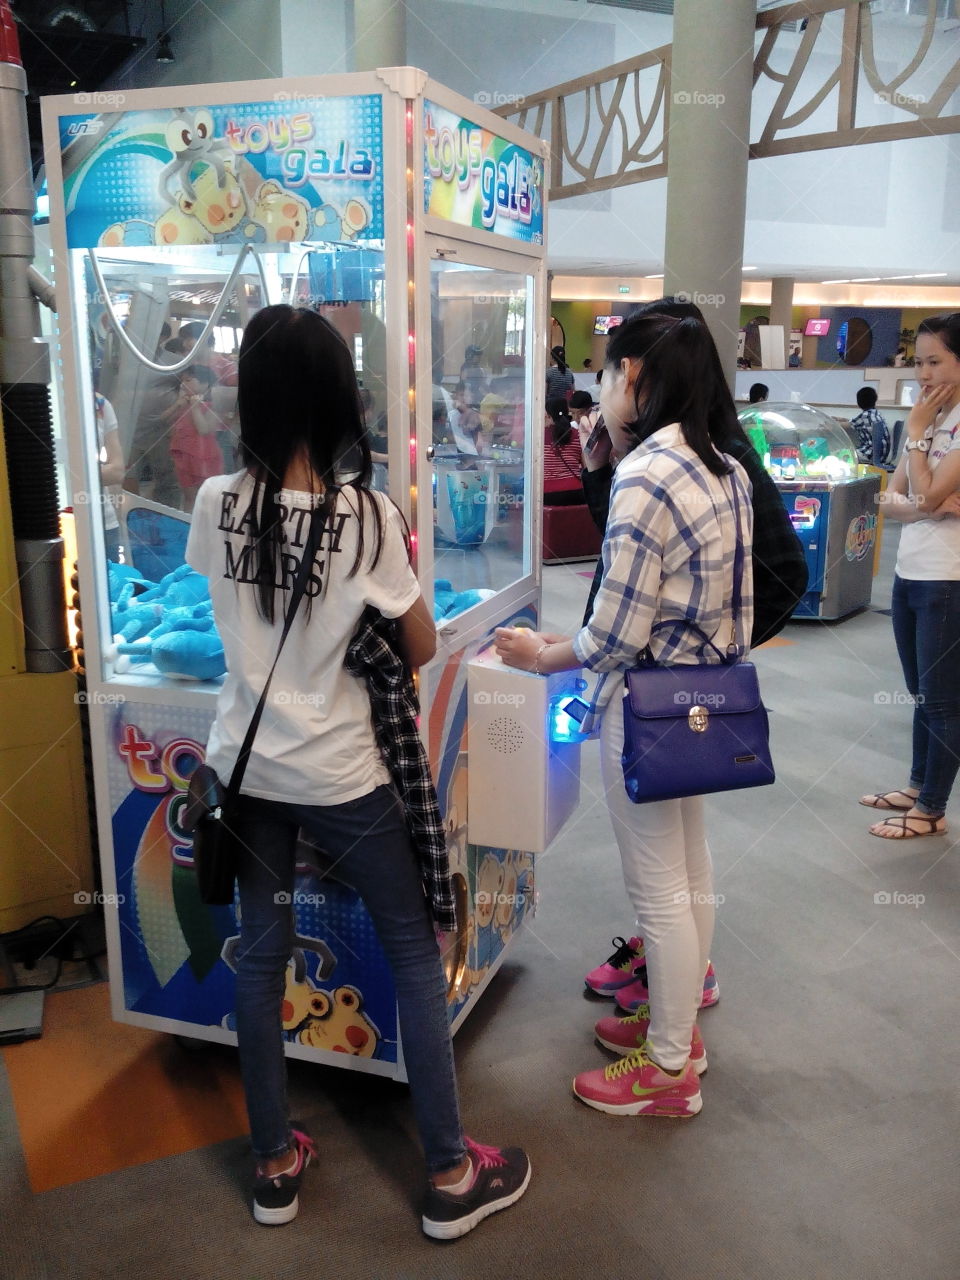 trying luck game at fun fair. girl playing crane to win toy